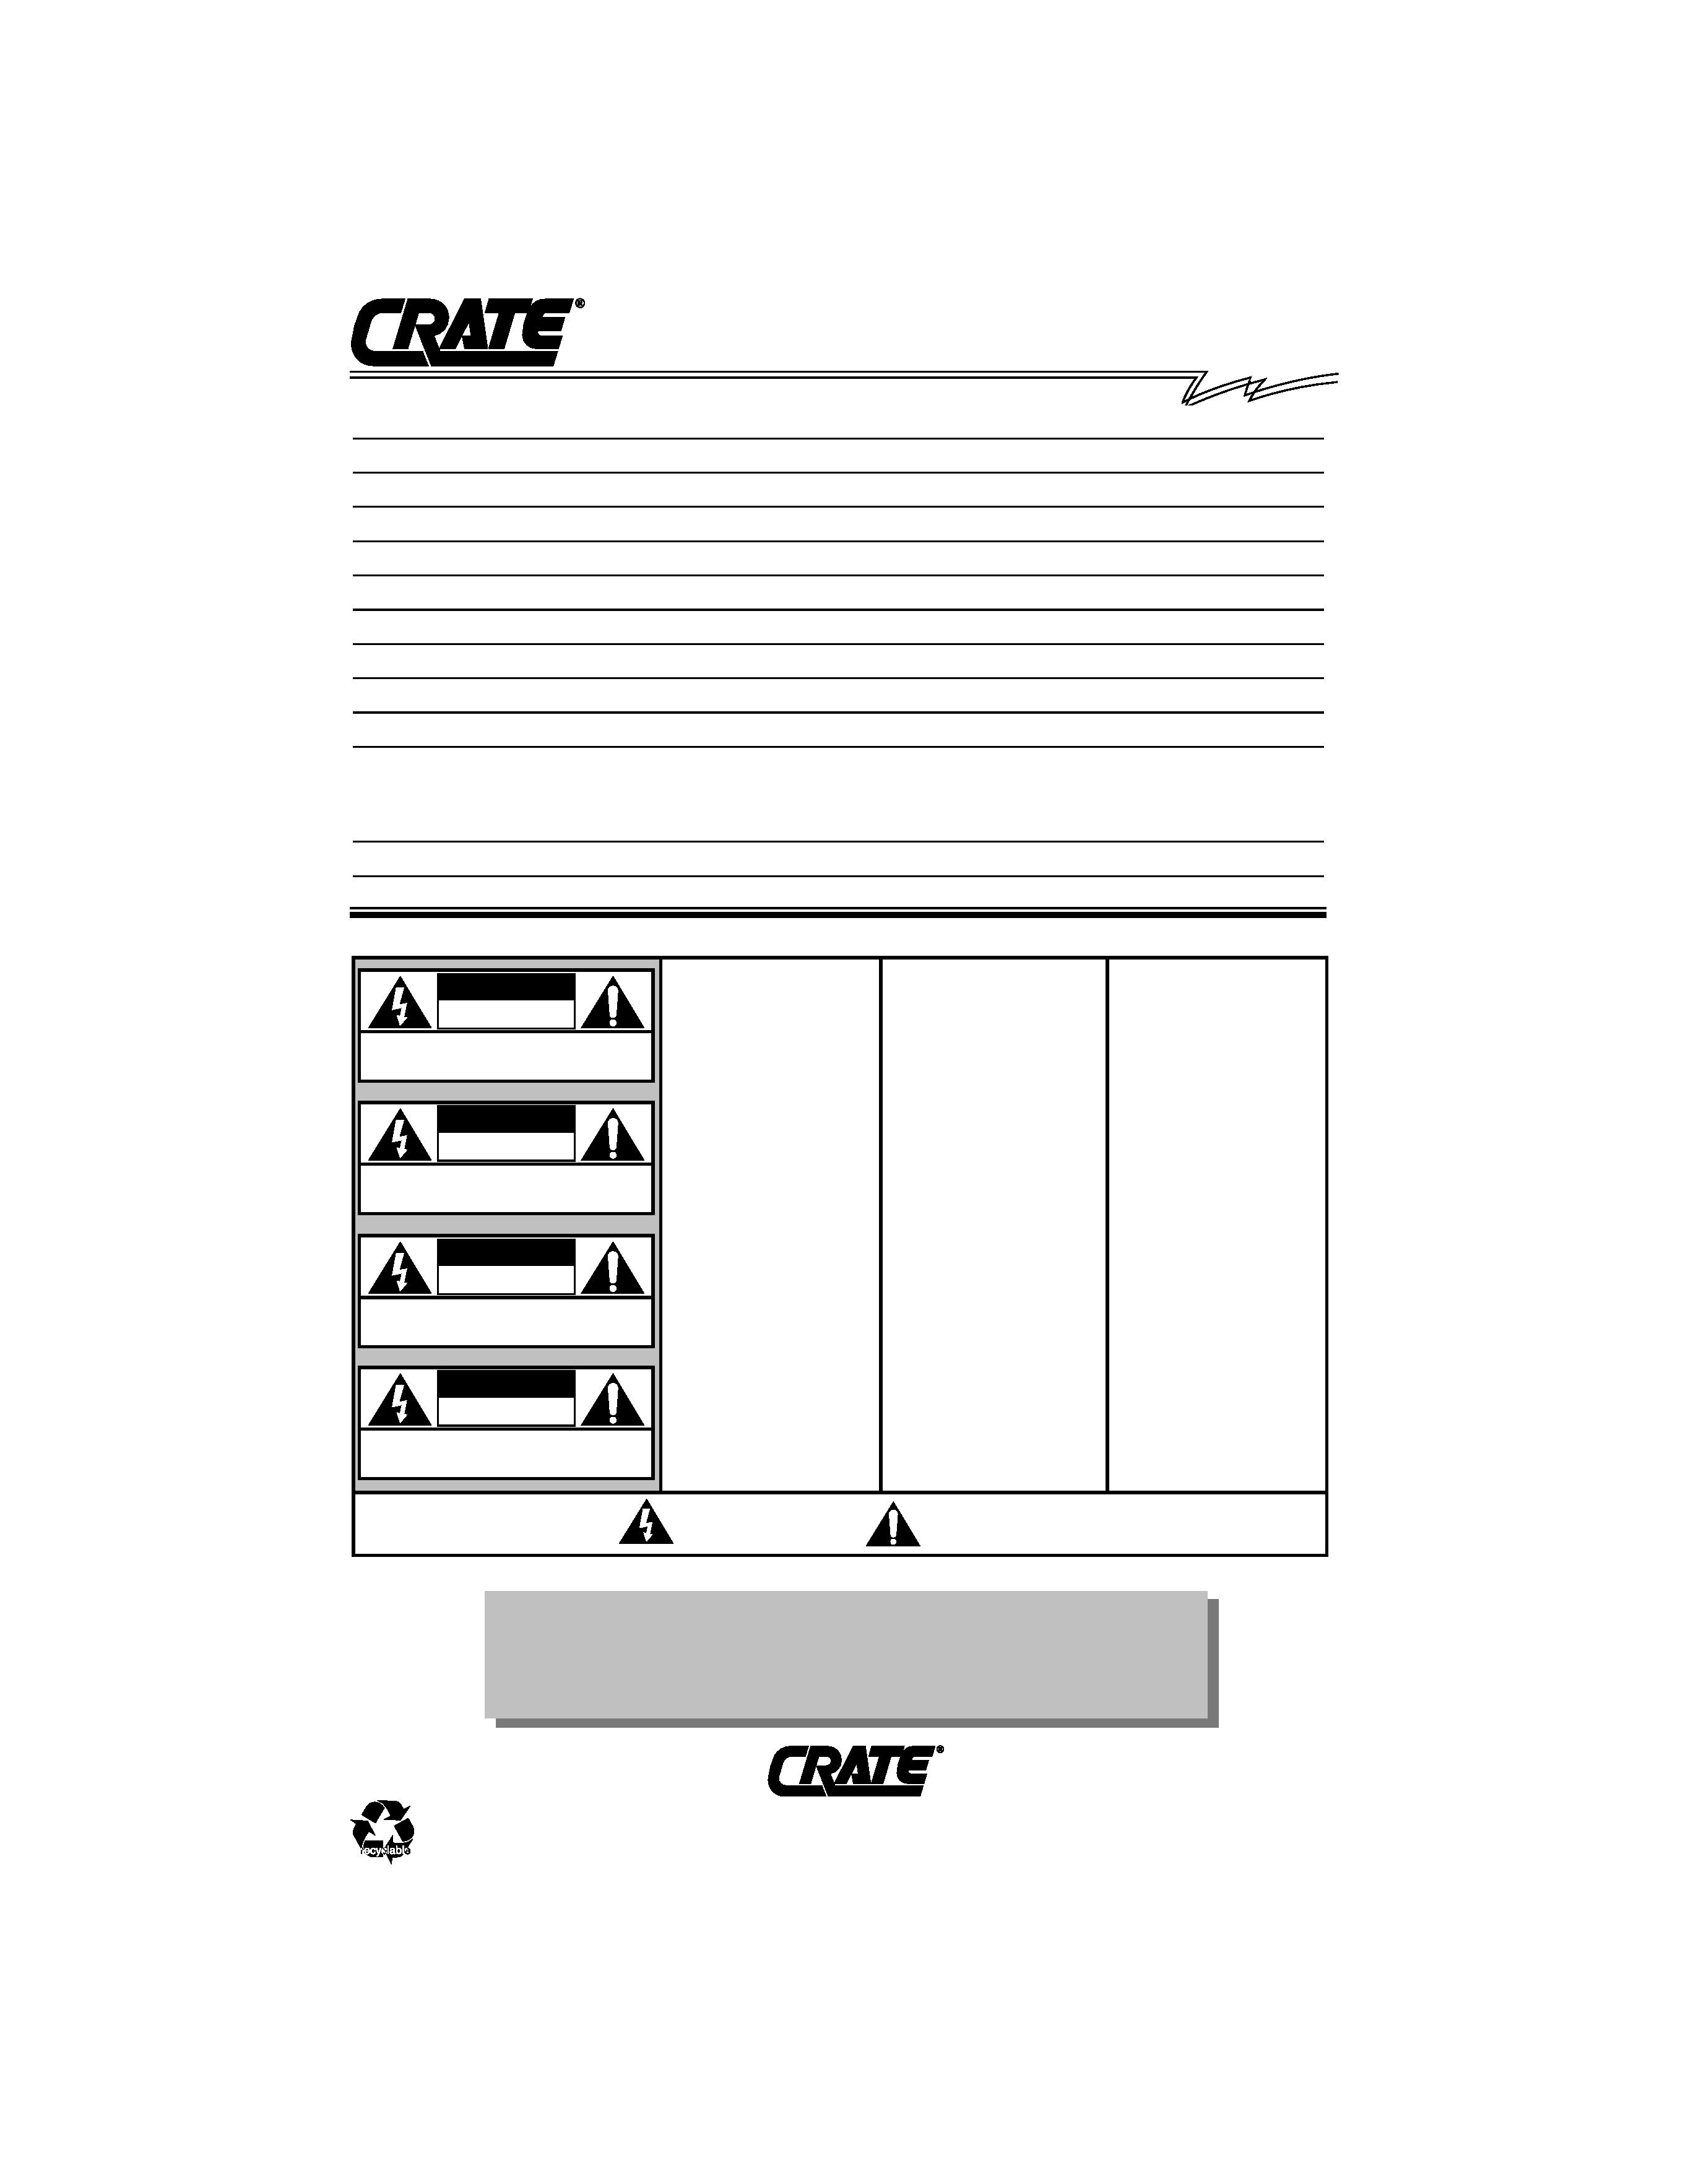 CRATE KX-15 - Owner's Manual Immediate Download